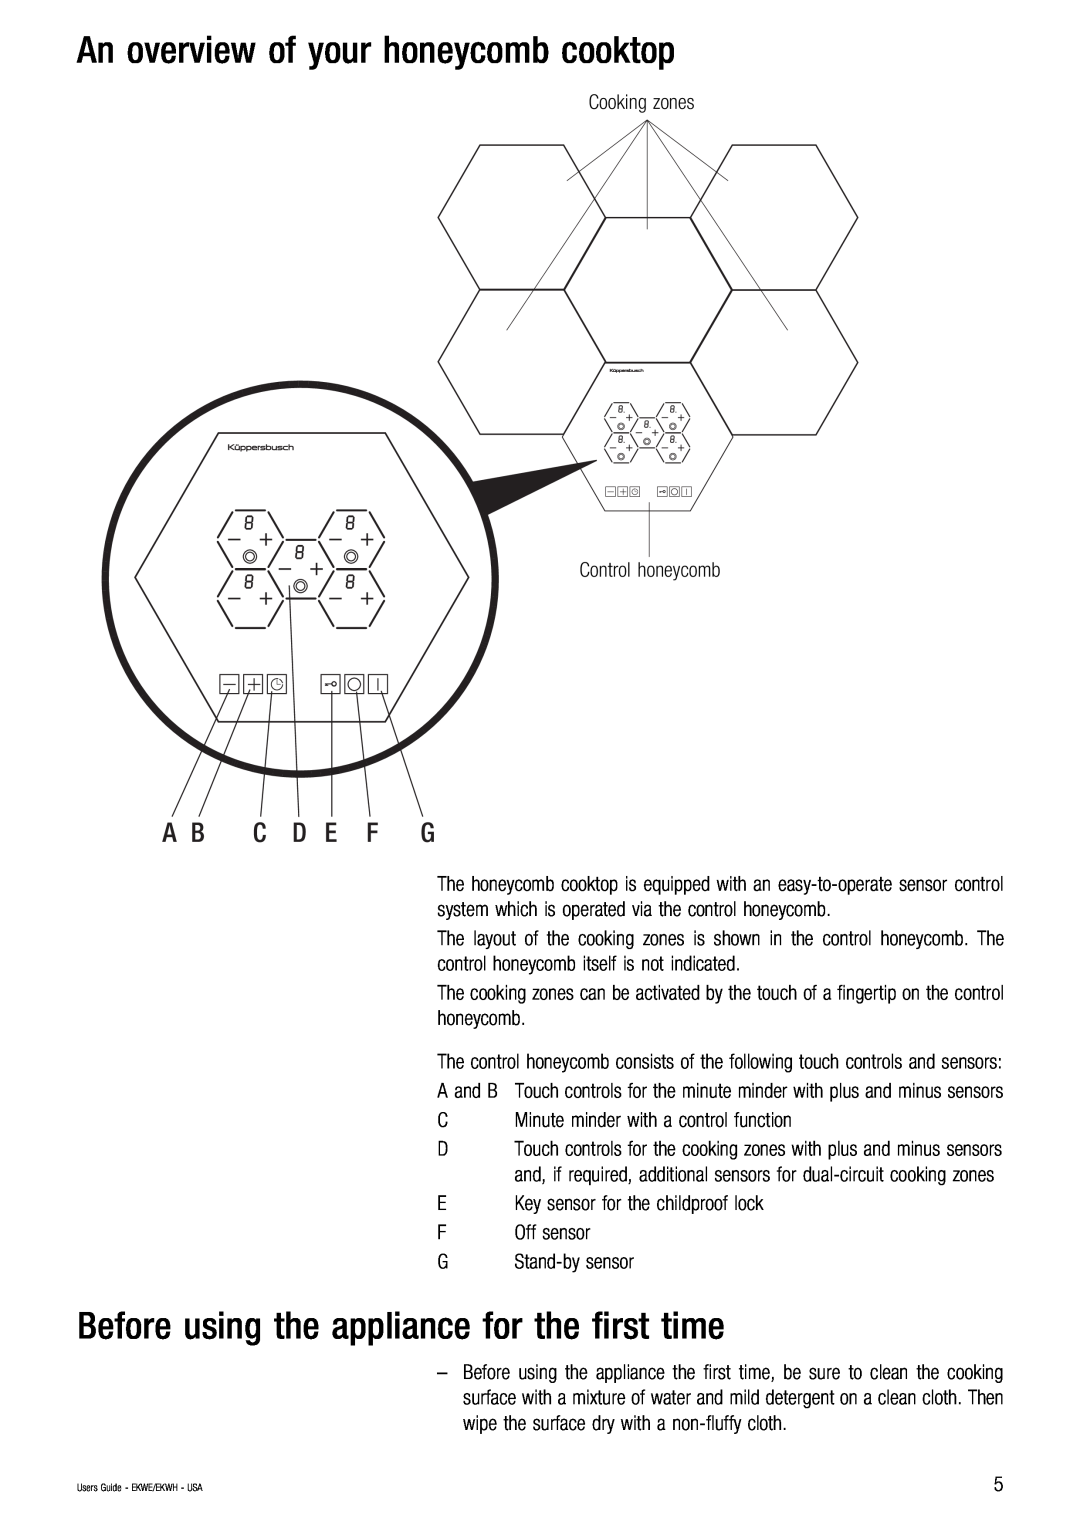 Kuppersbusch USA EKWE, EKWH manual An overview of your honeycomb cooktop, Before using the appliance for the first time 